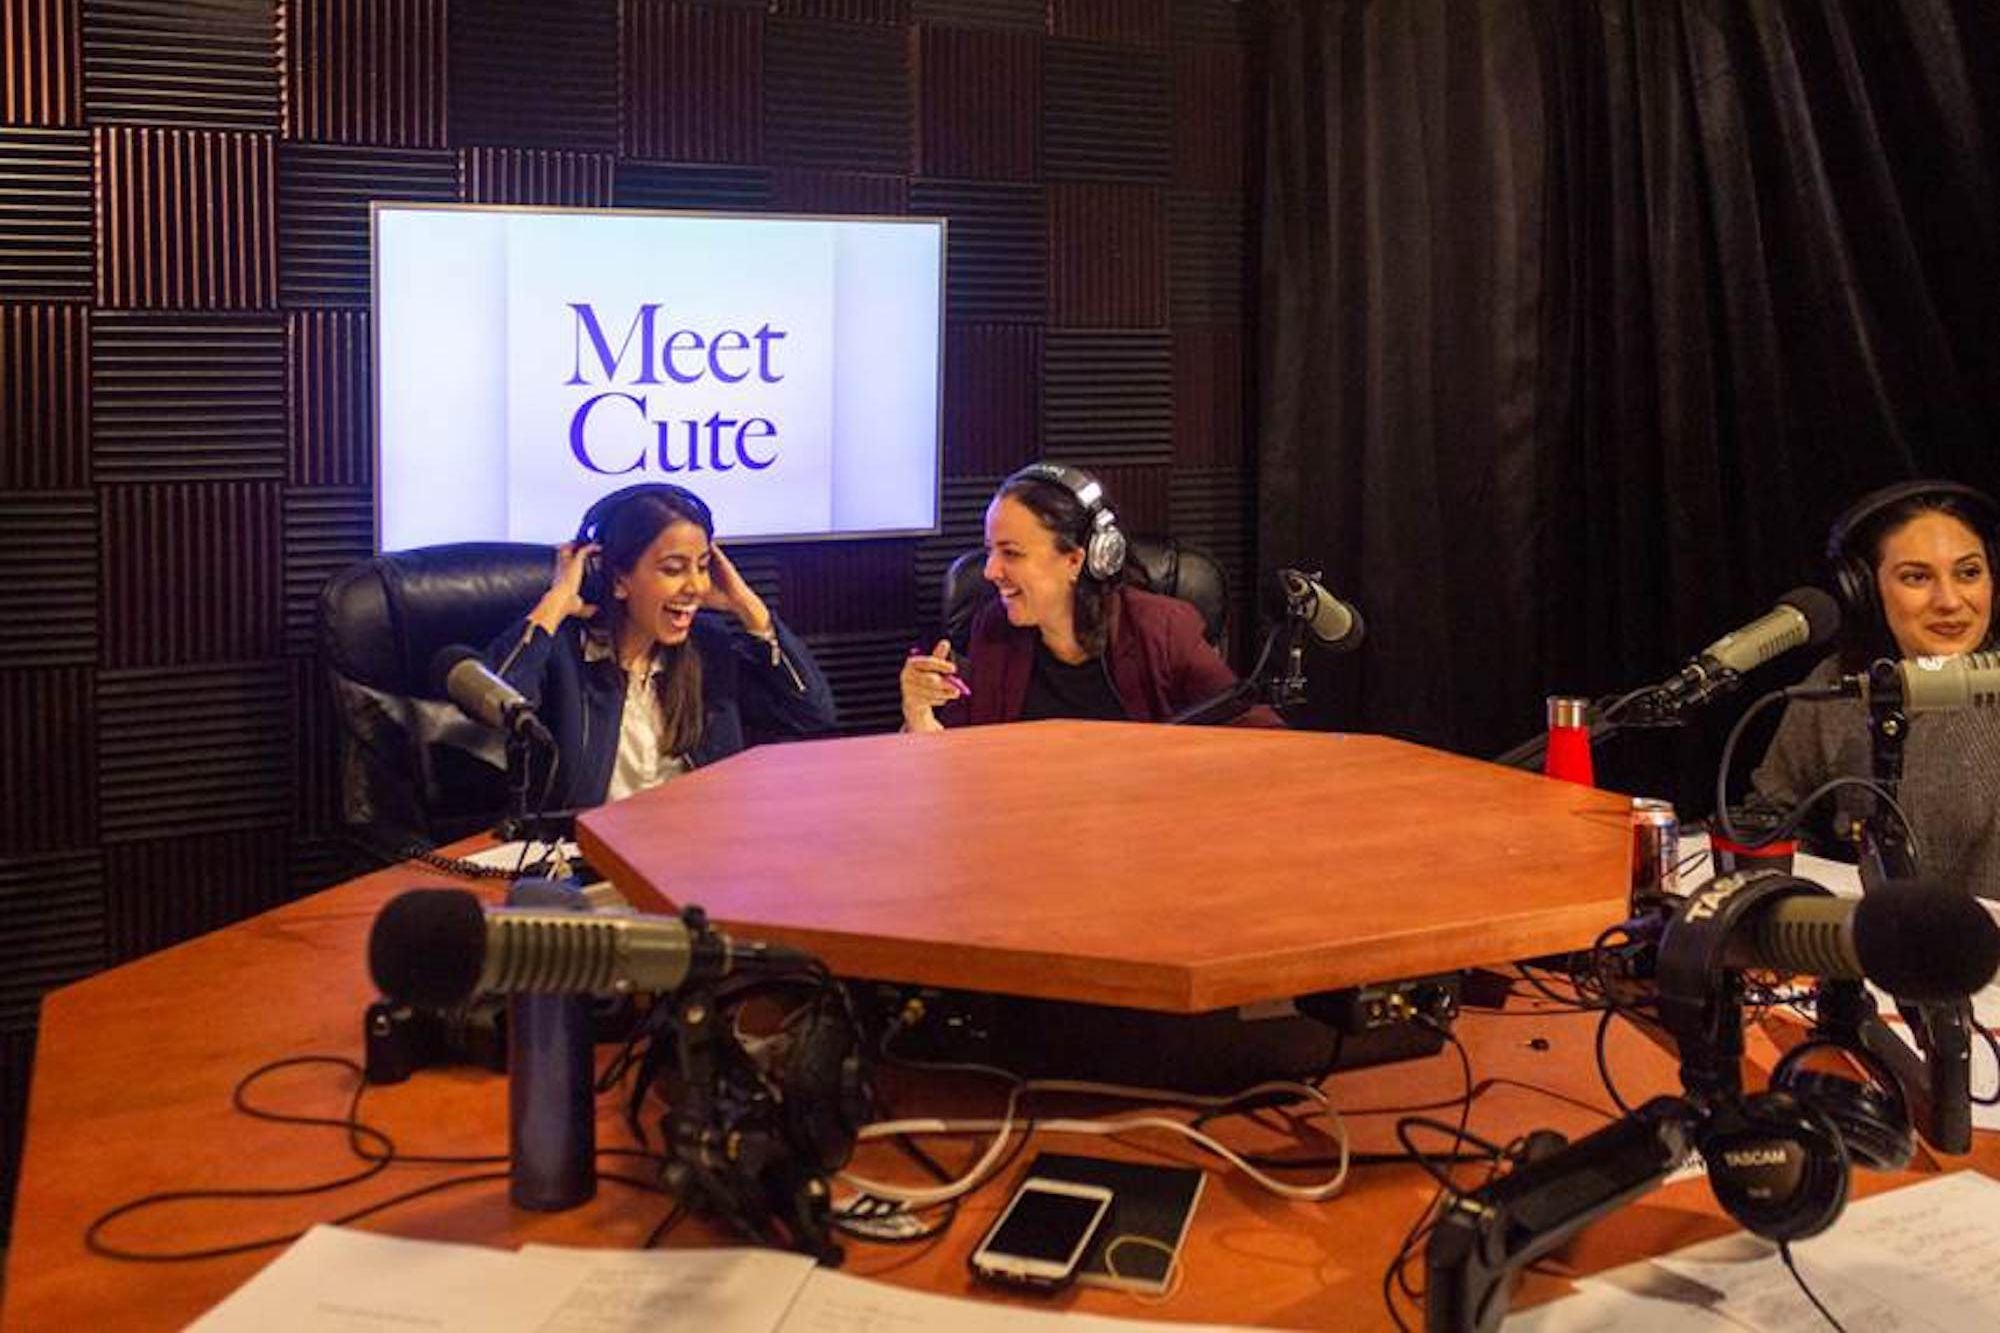 Need a Mental Break? The 'Meet Cute' Podcast Delivers Rom-Com Escape in 15-Minute Bursts